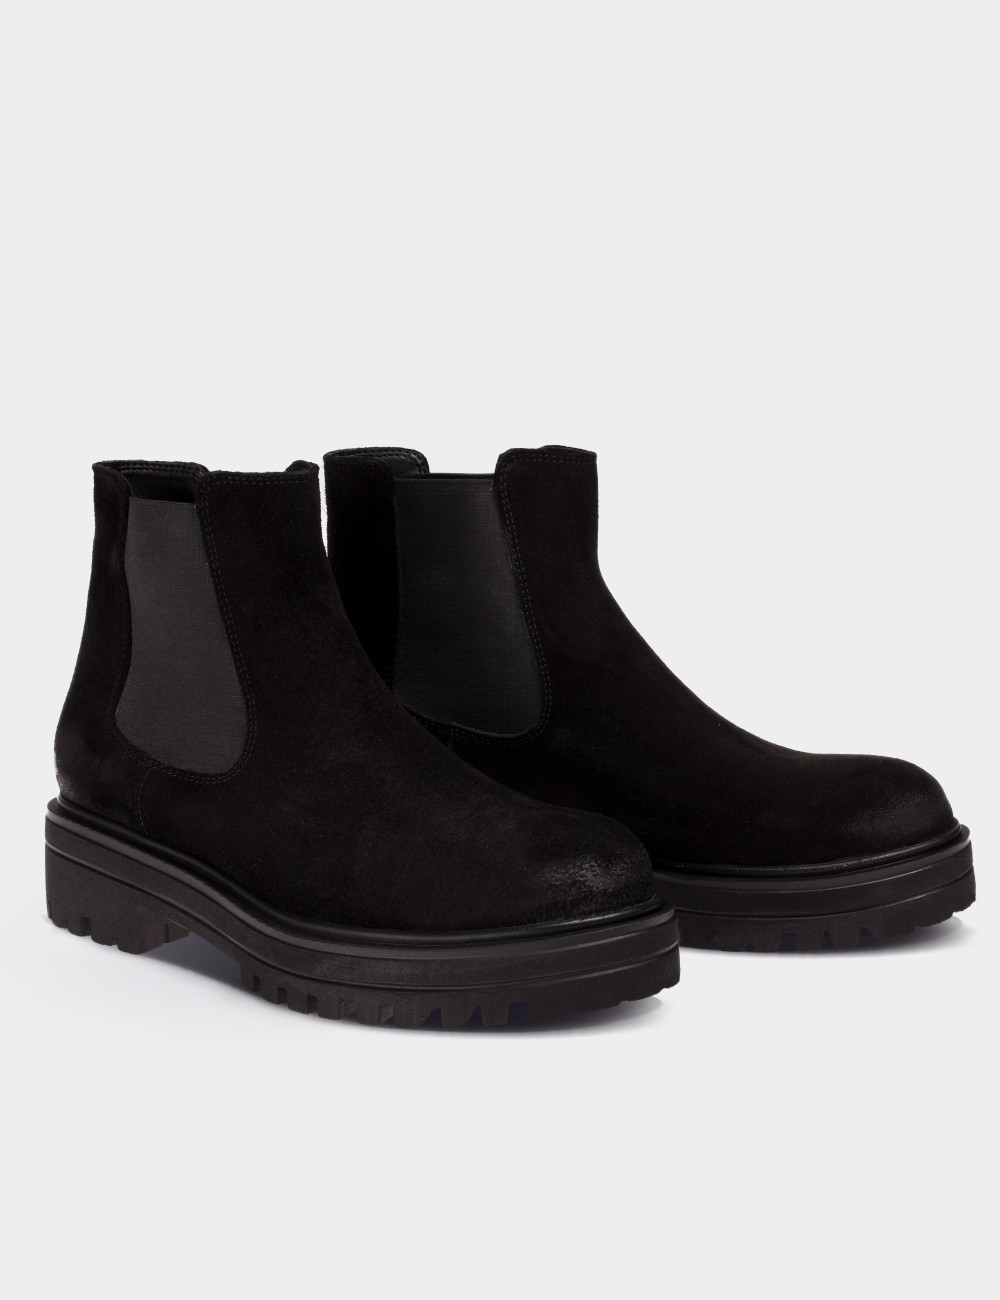 Black Suede Leather Boots - 01801ZSYHE01